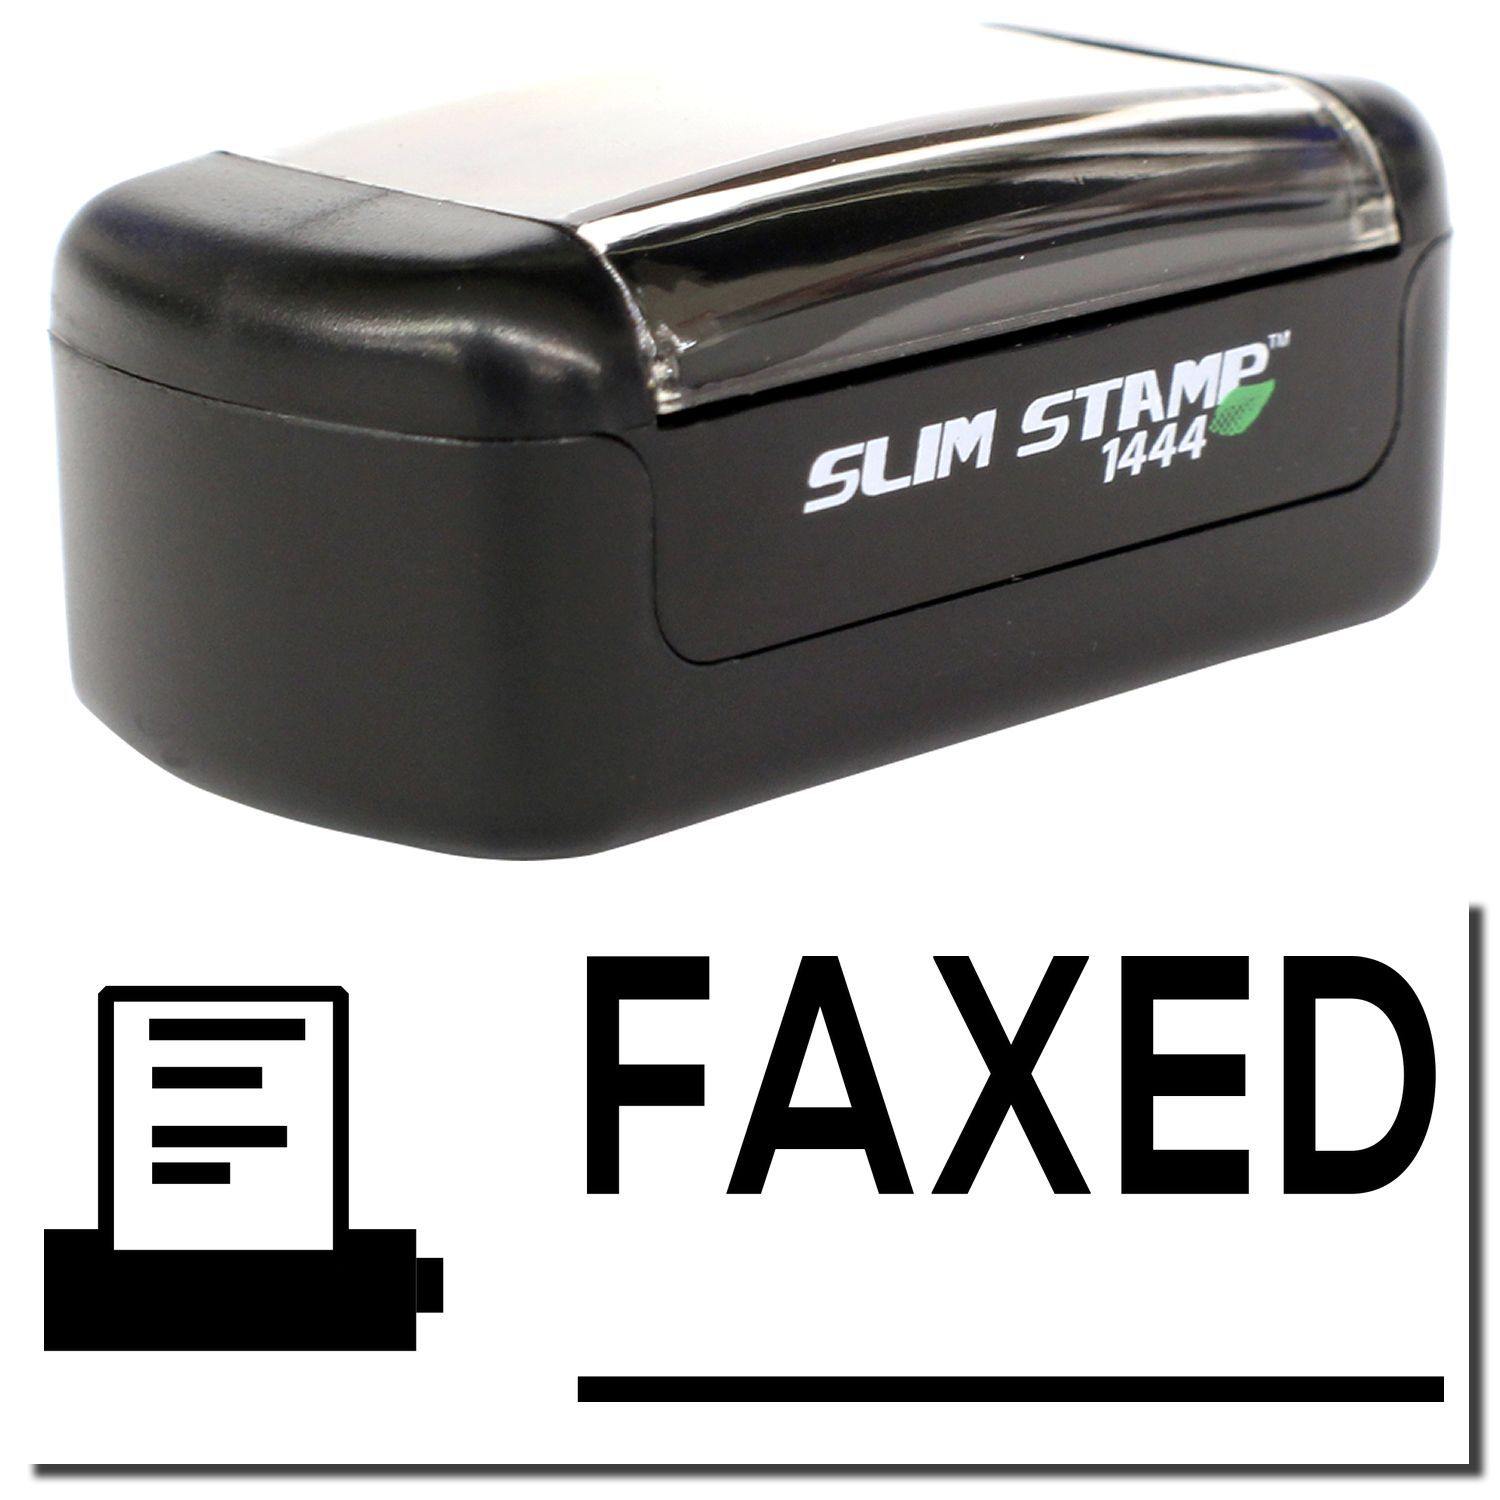 A stock office pre-inked stamp with a stamped image showing how the text "FAXED" with a line underneath the text and a machine icon on the left side is displayed after stamping.